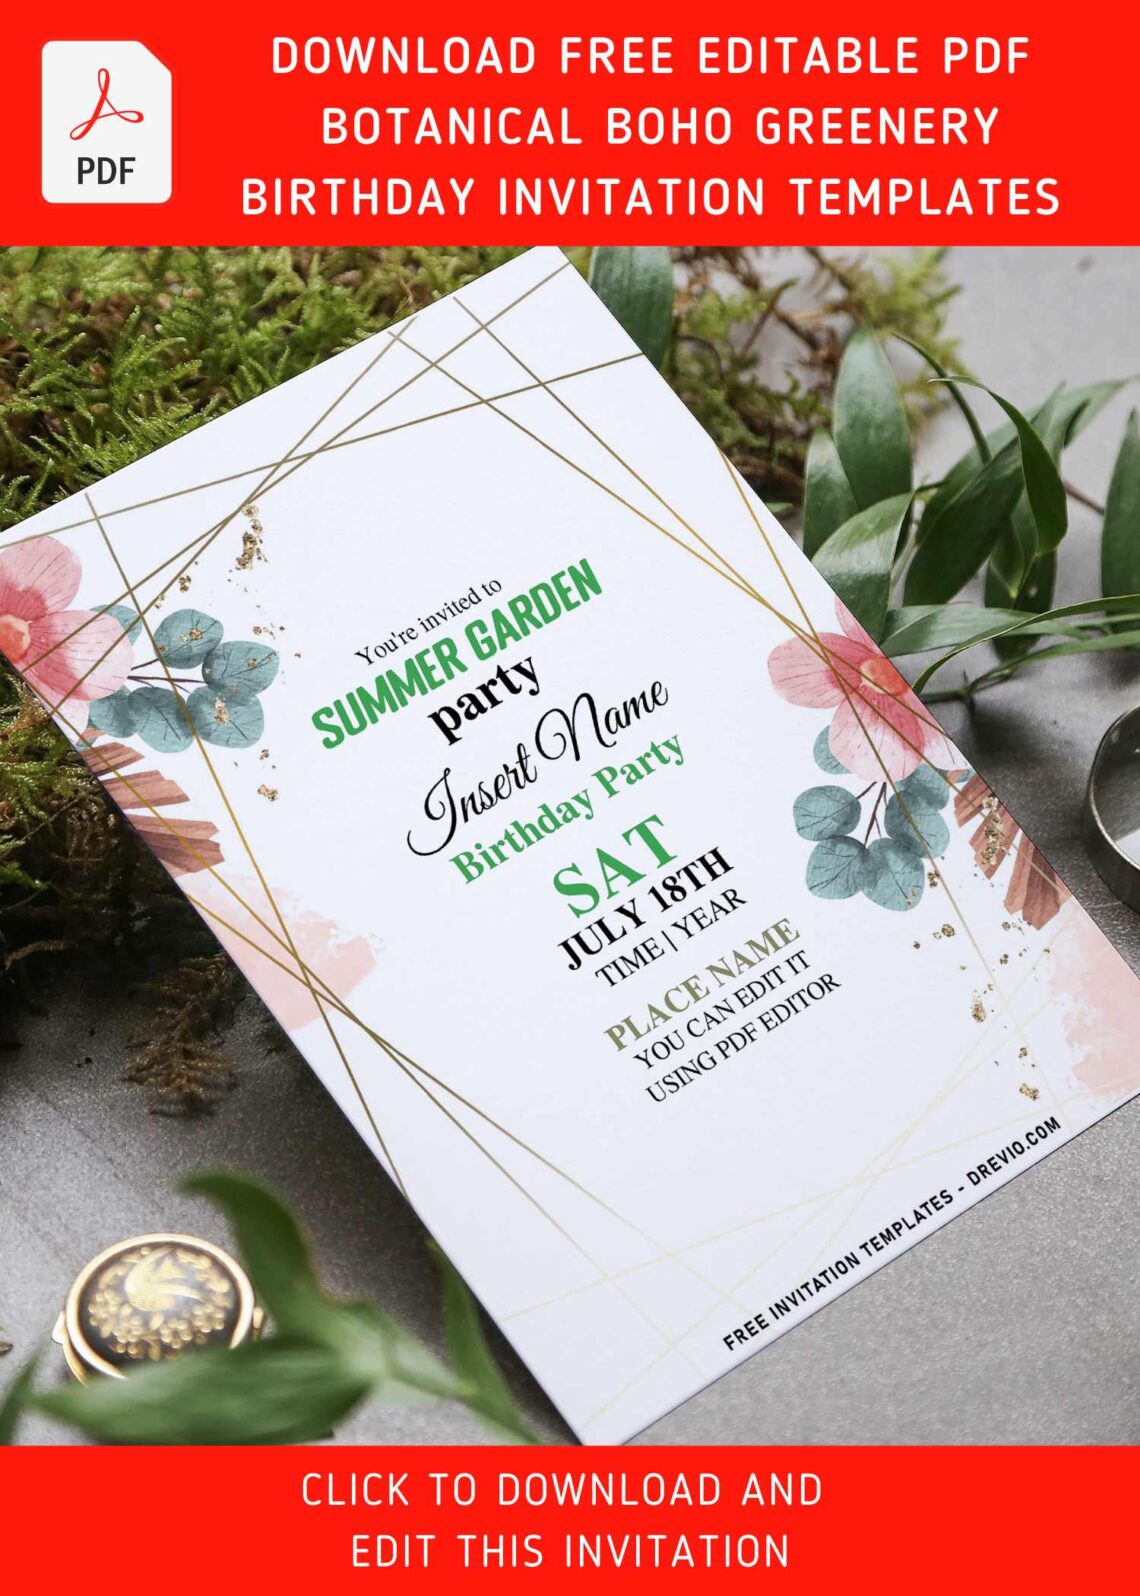 (Free Editable PDF) Rose Gold Boho Floral And Greenery Invitation Templates with dried lunaria